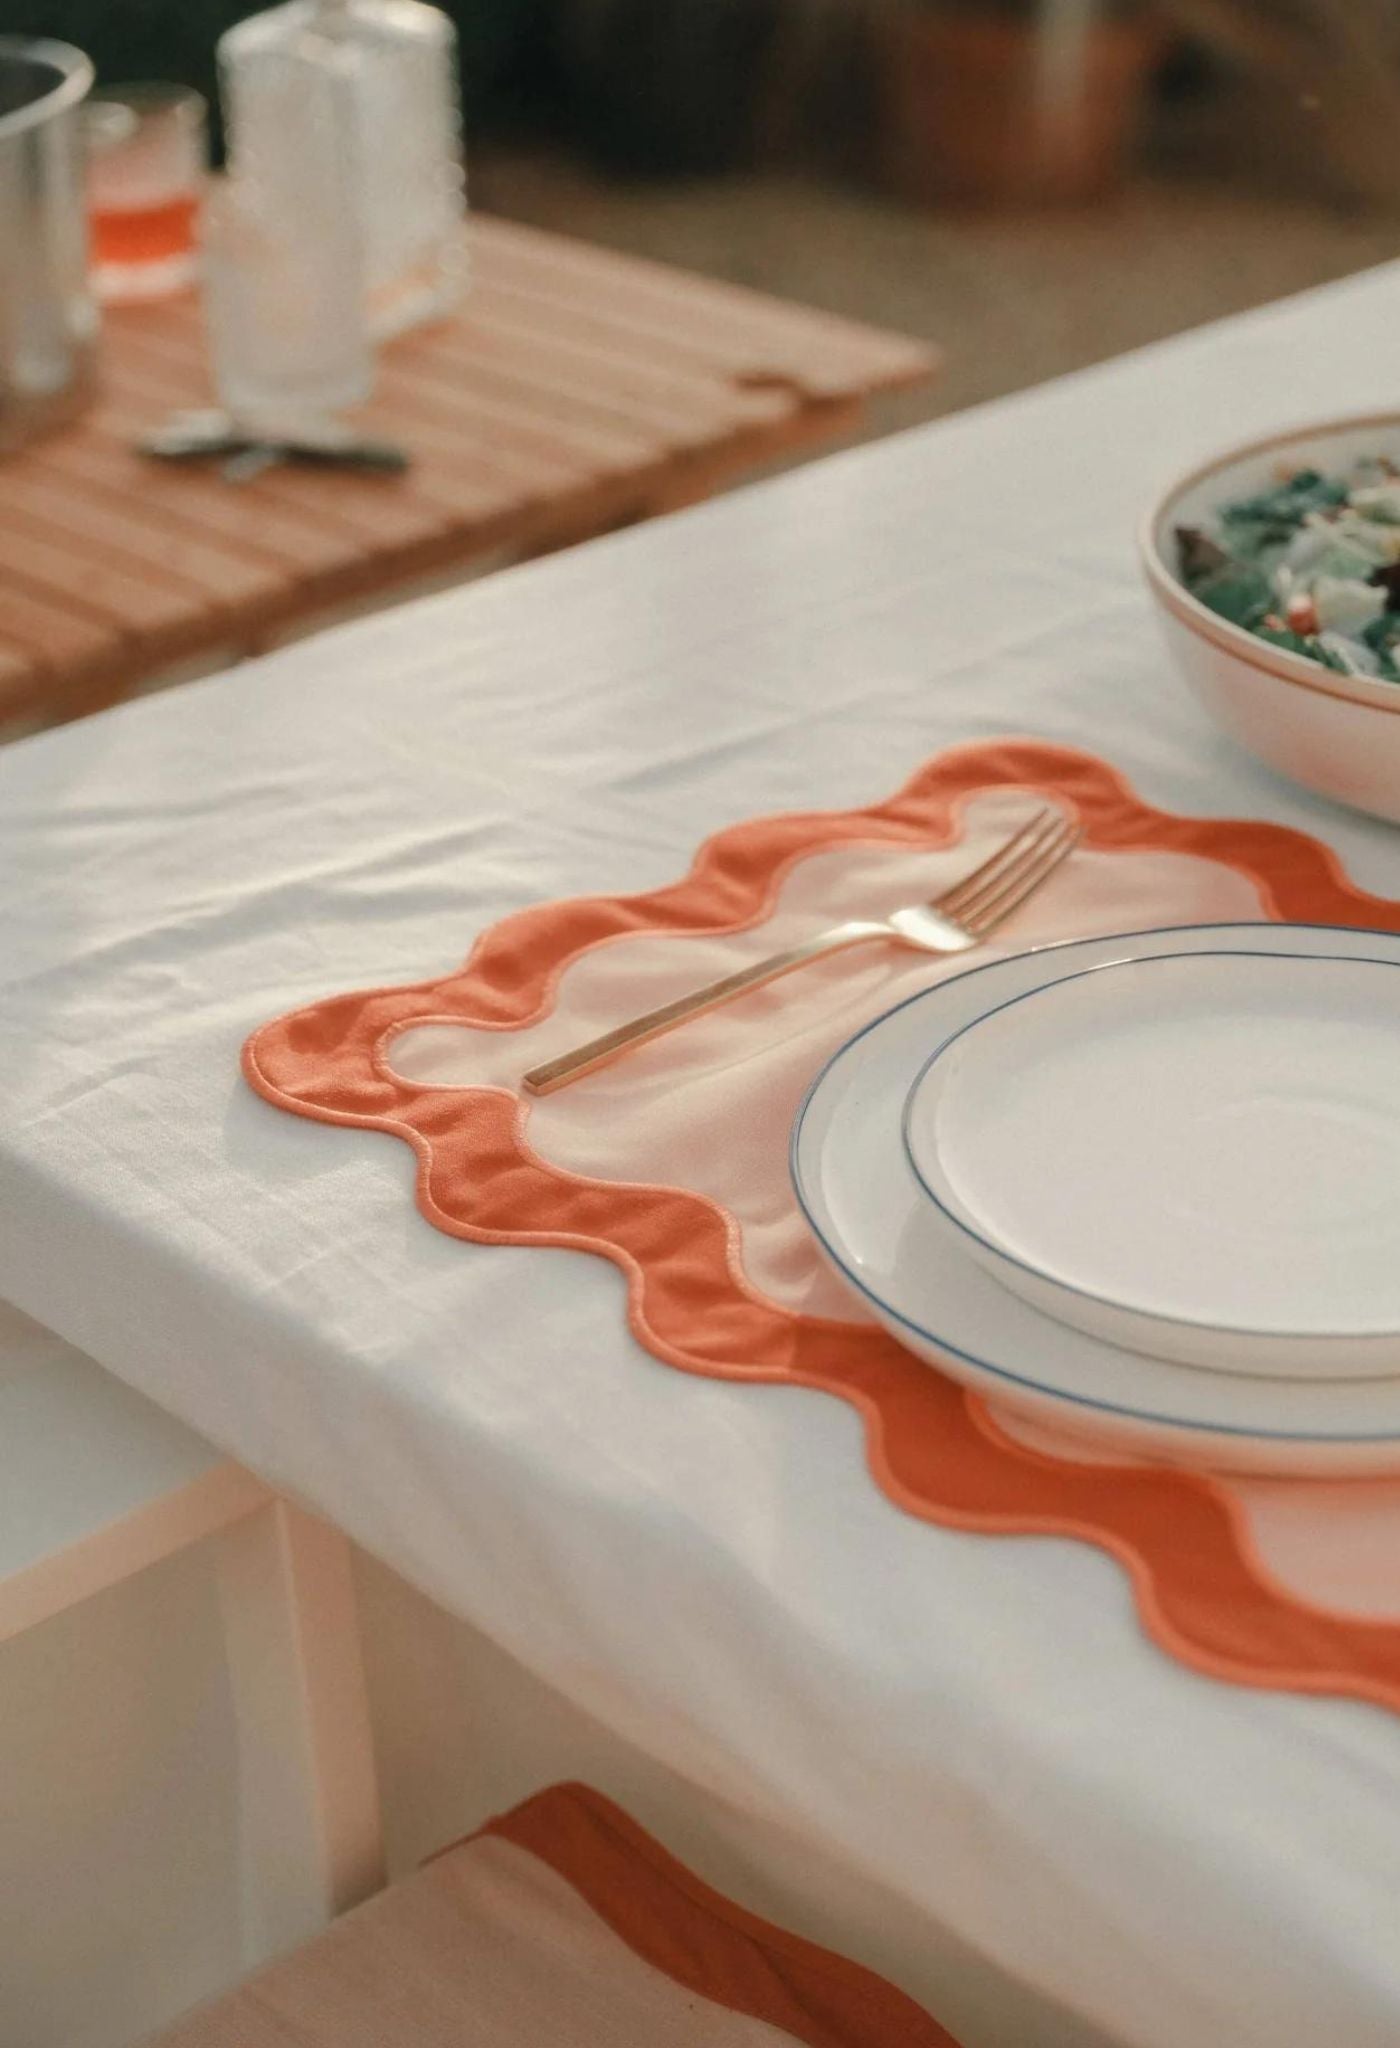 Scallop Border Placemats